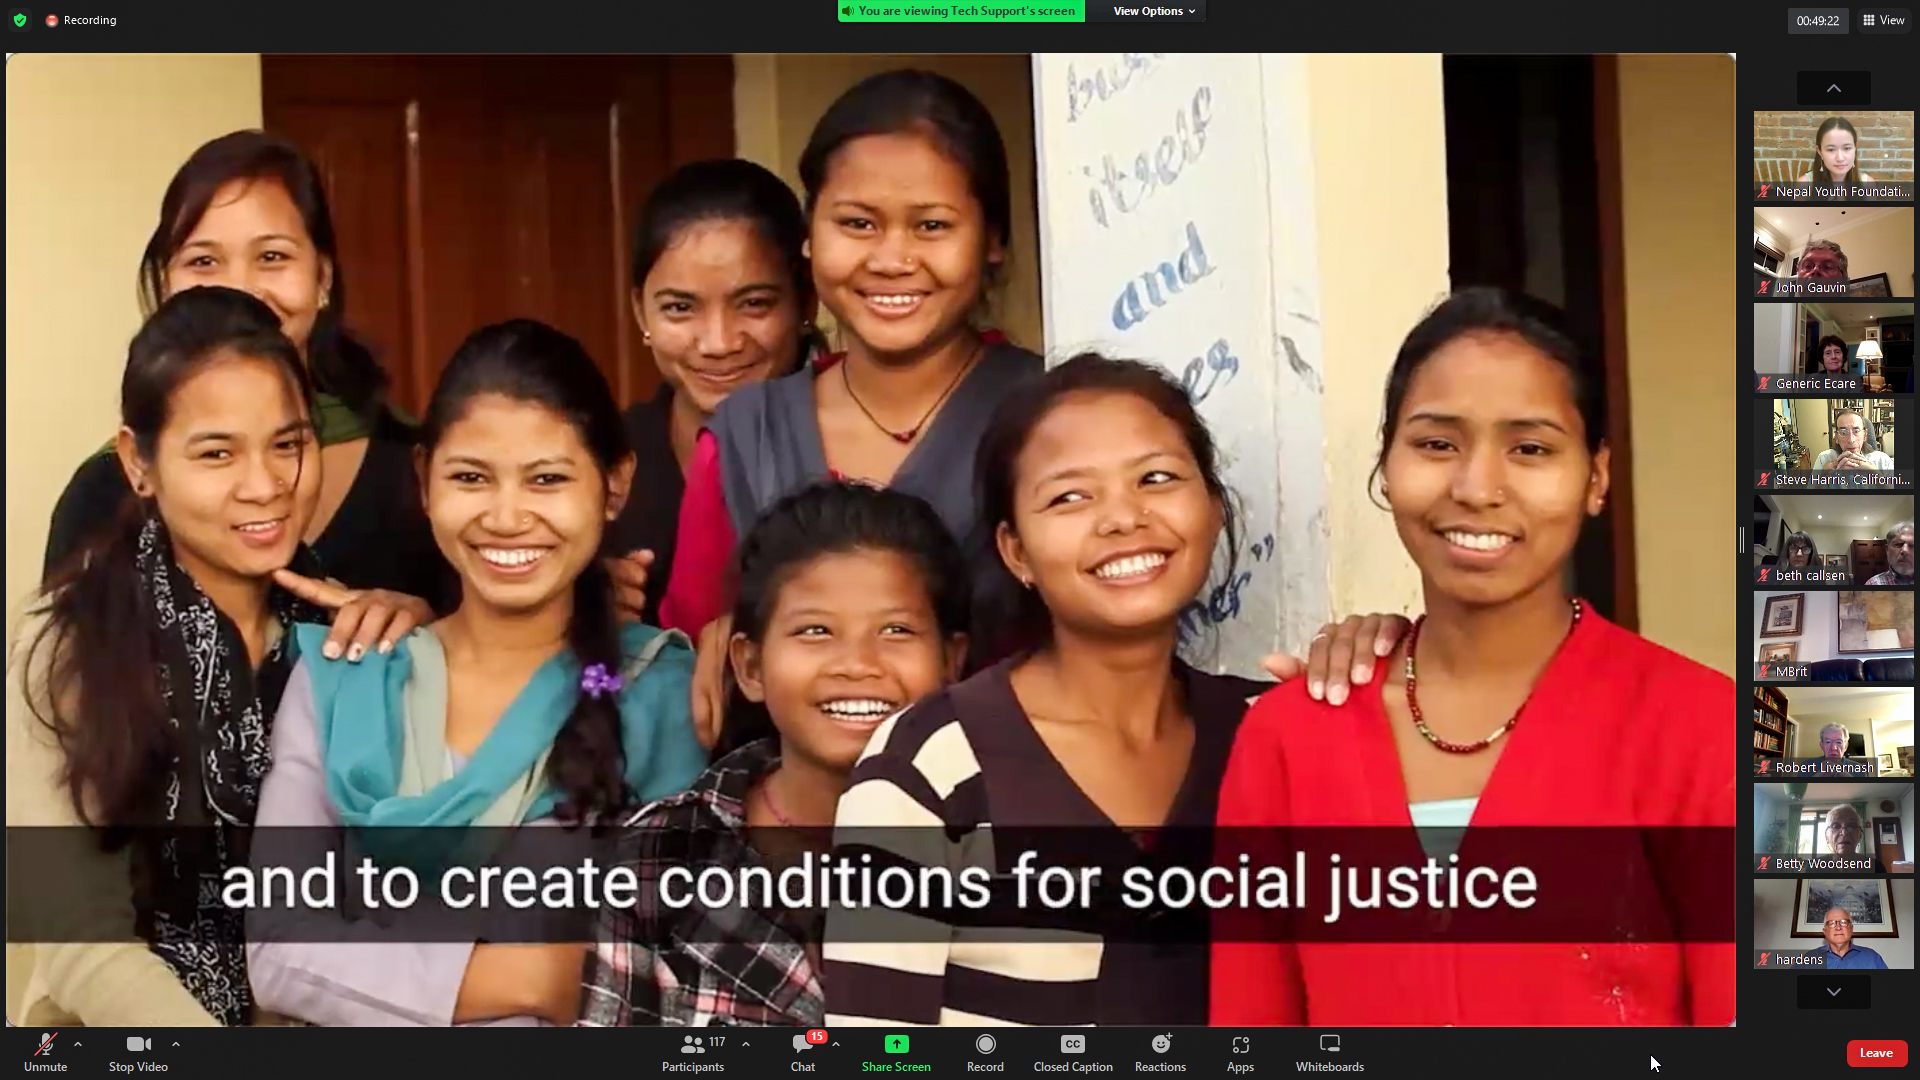 A Zoom screenshot from a video presentation during Founder's Day 2022. A caption along the bottom says, "and to create conditions for social justice". The image is of a group of eight young Nepali women grinning at the camera while standing together with a friendly, familiar energy between them. Their clothes are office casual and blend elements of western and Nepali styles.